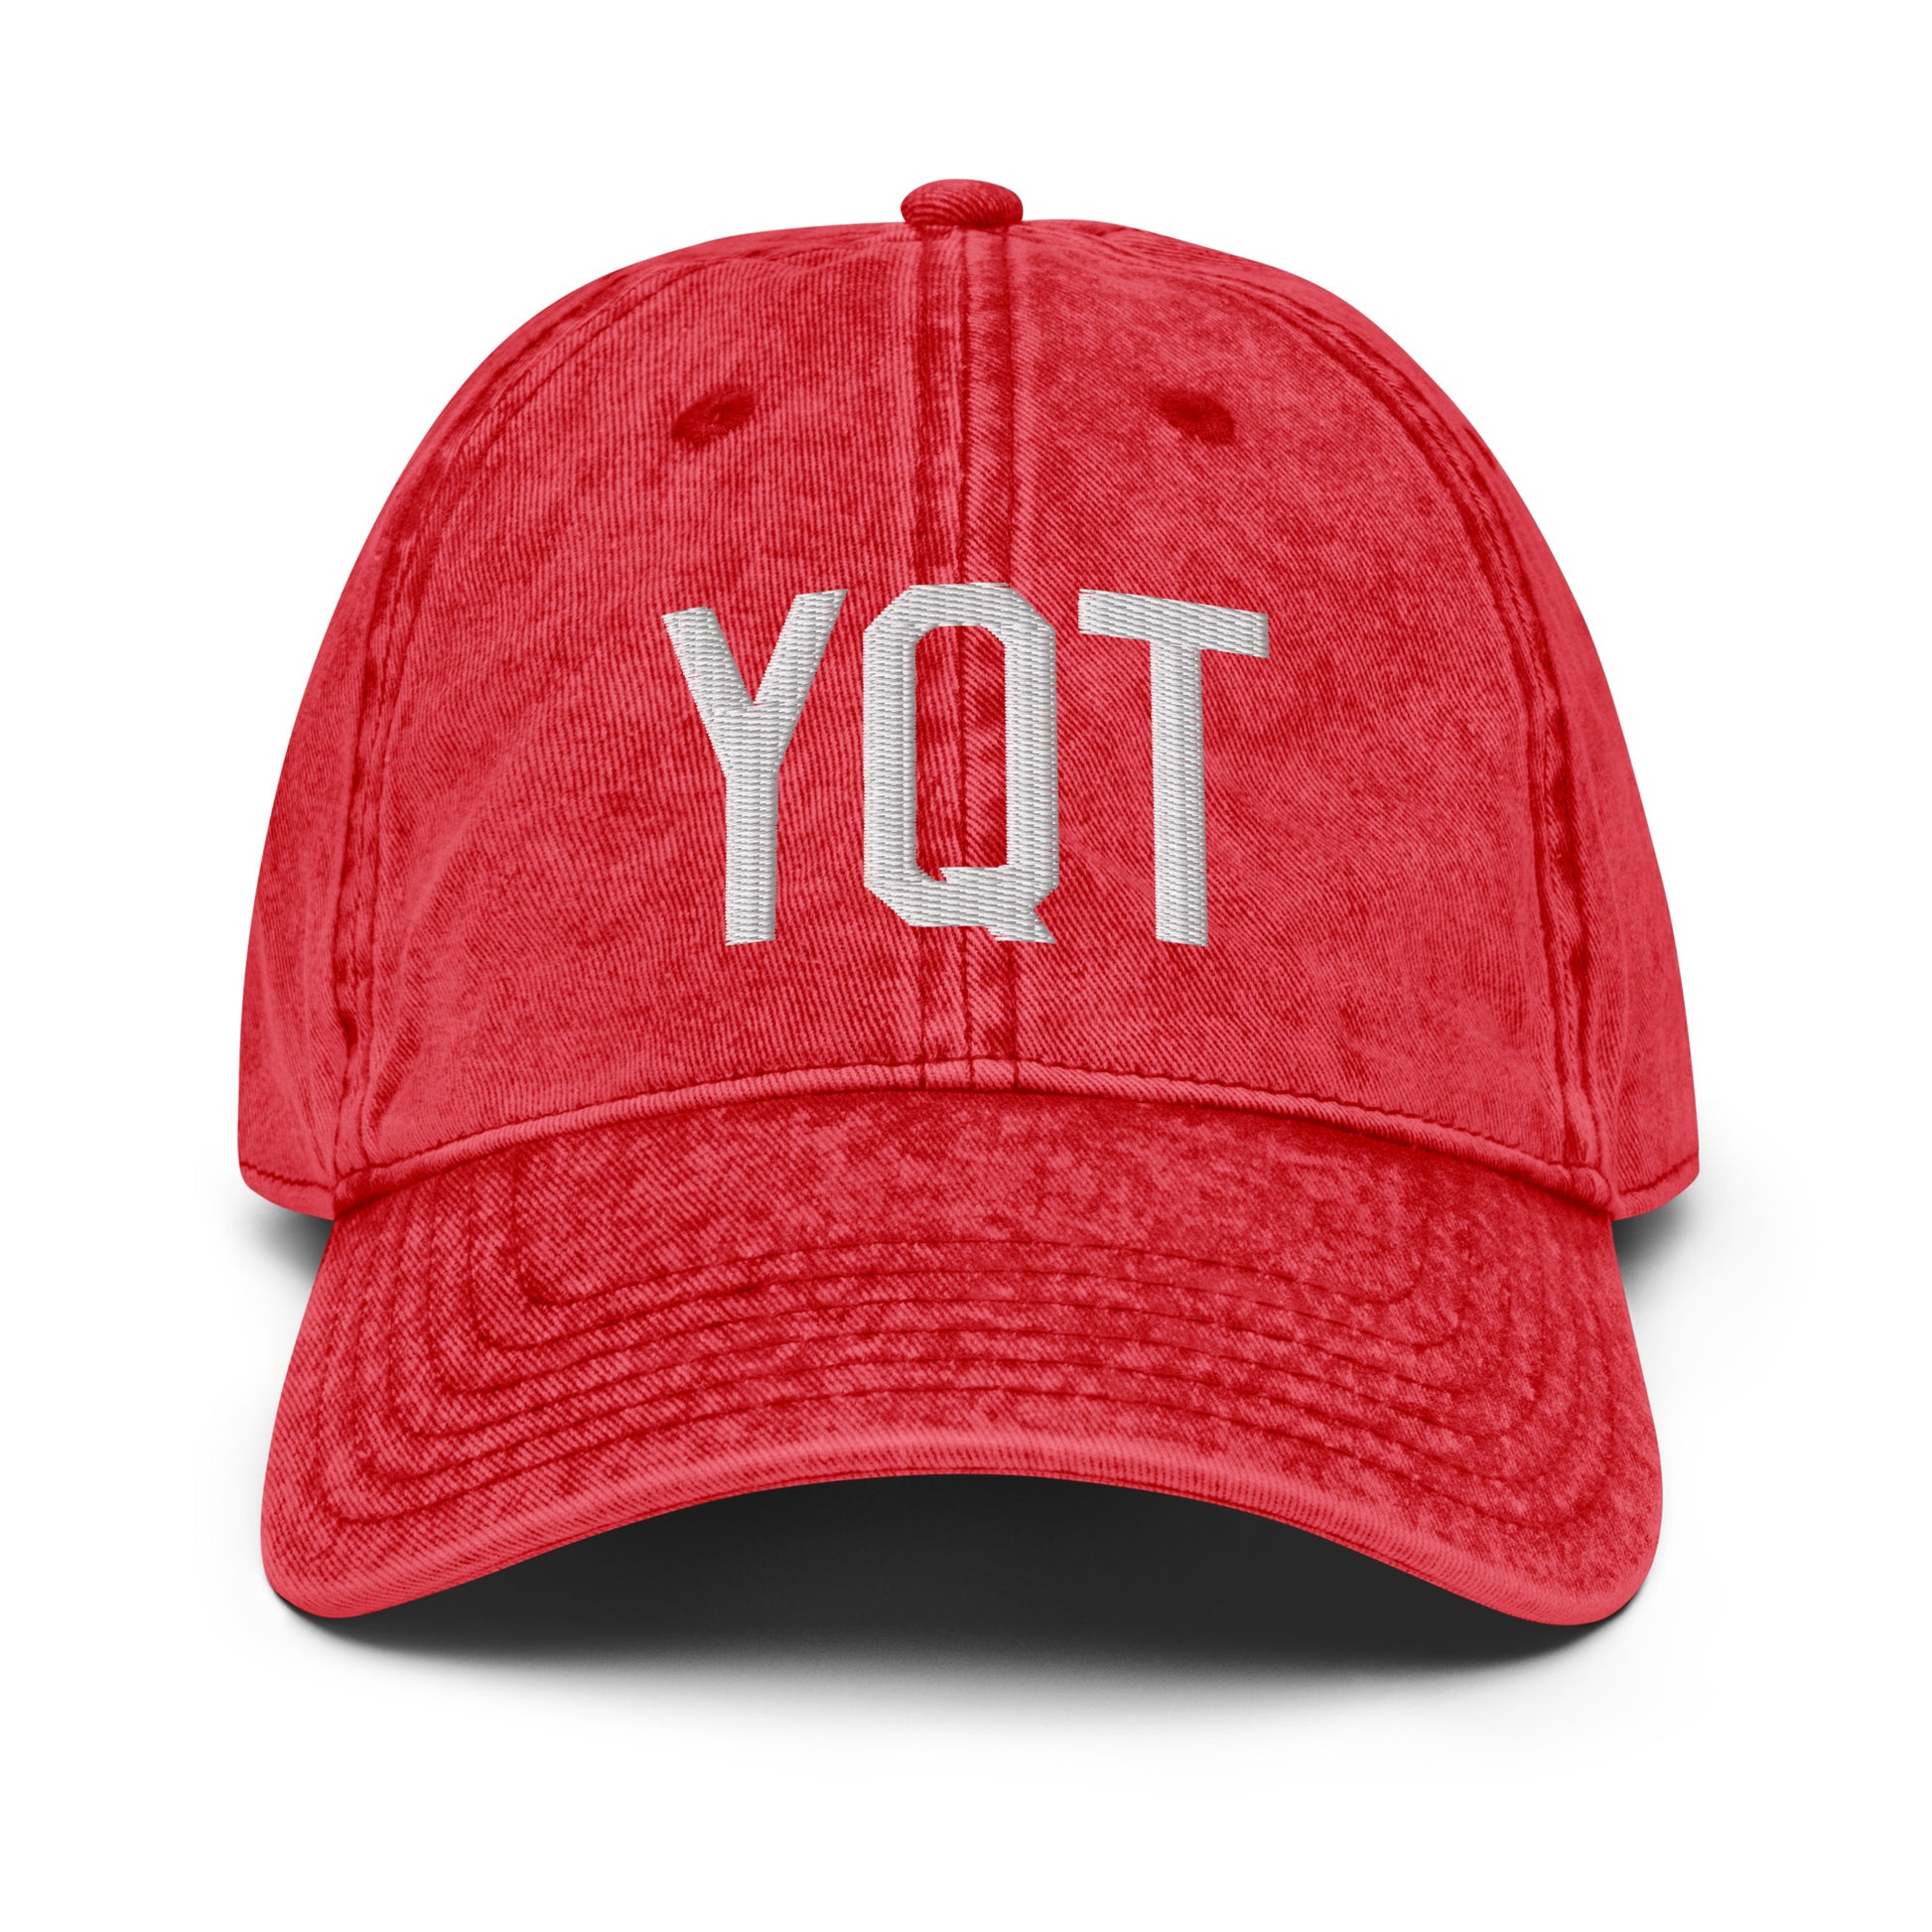 Airport Code Twill Cap - White • YQT Thunder Bay • YHM Designs - Image 22